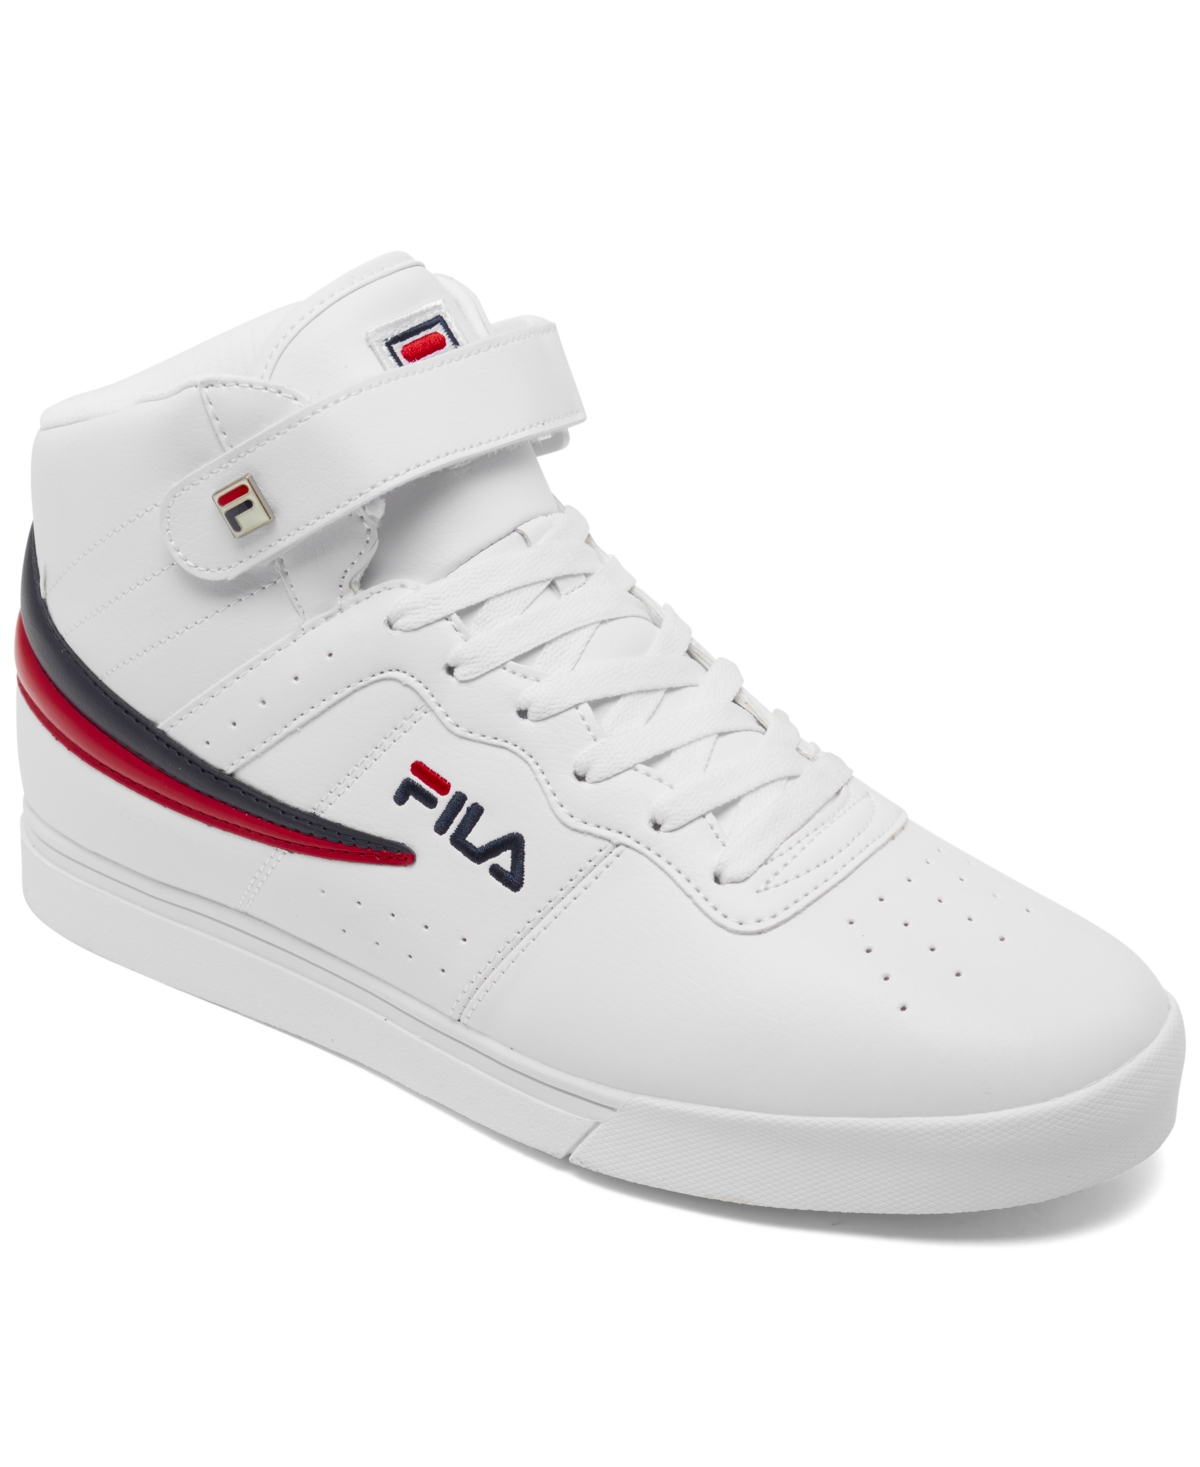 Men's Vulc 13 Mid Plus Casual Sneakers from Finish Line - White, Navy